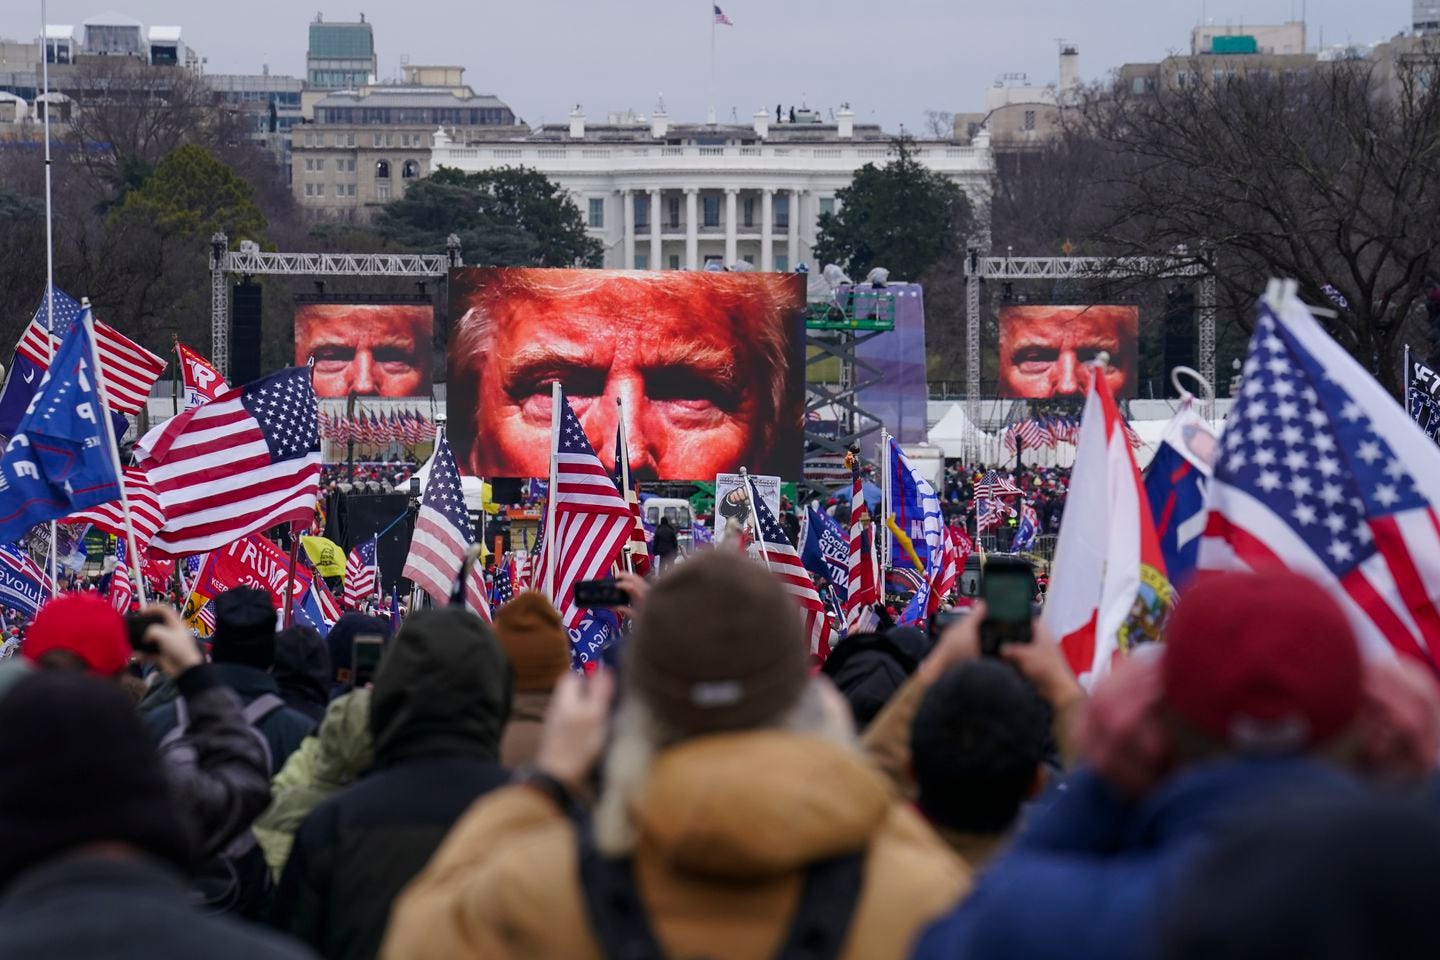 Trump supporters rally in Washington on Jan. 6 before storming the US Capitol. Far-right social media users for weeks openly hinted in widely shared posts that chaos would erupt at the Capitol when Congress convened to certify the election results.